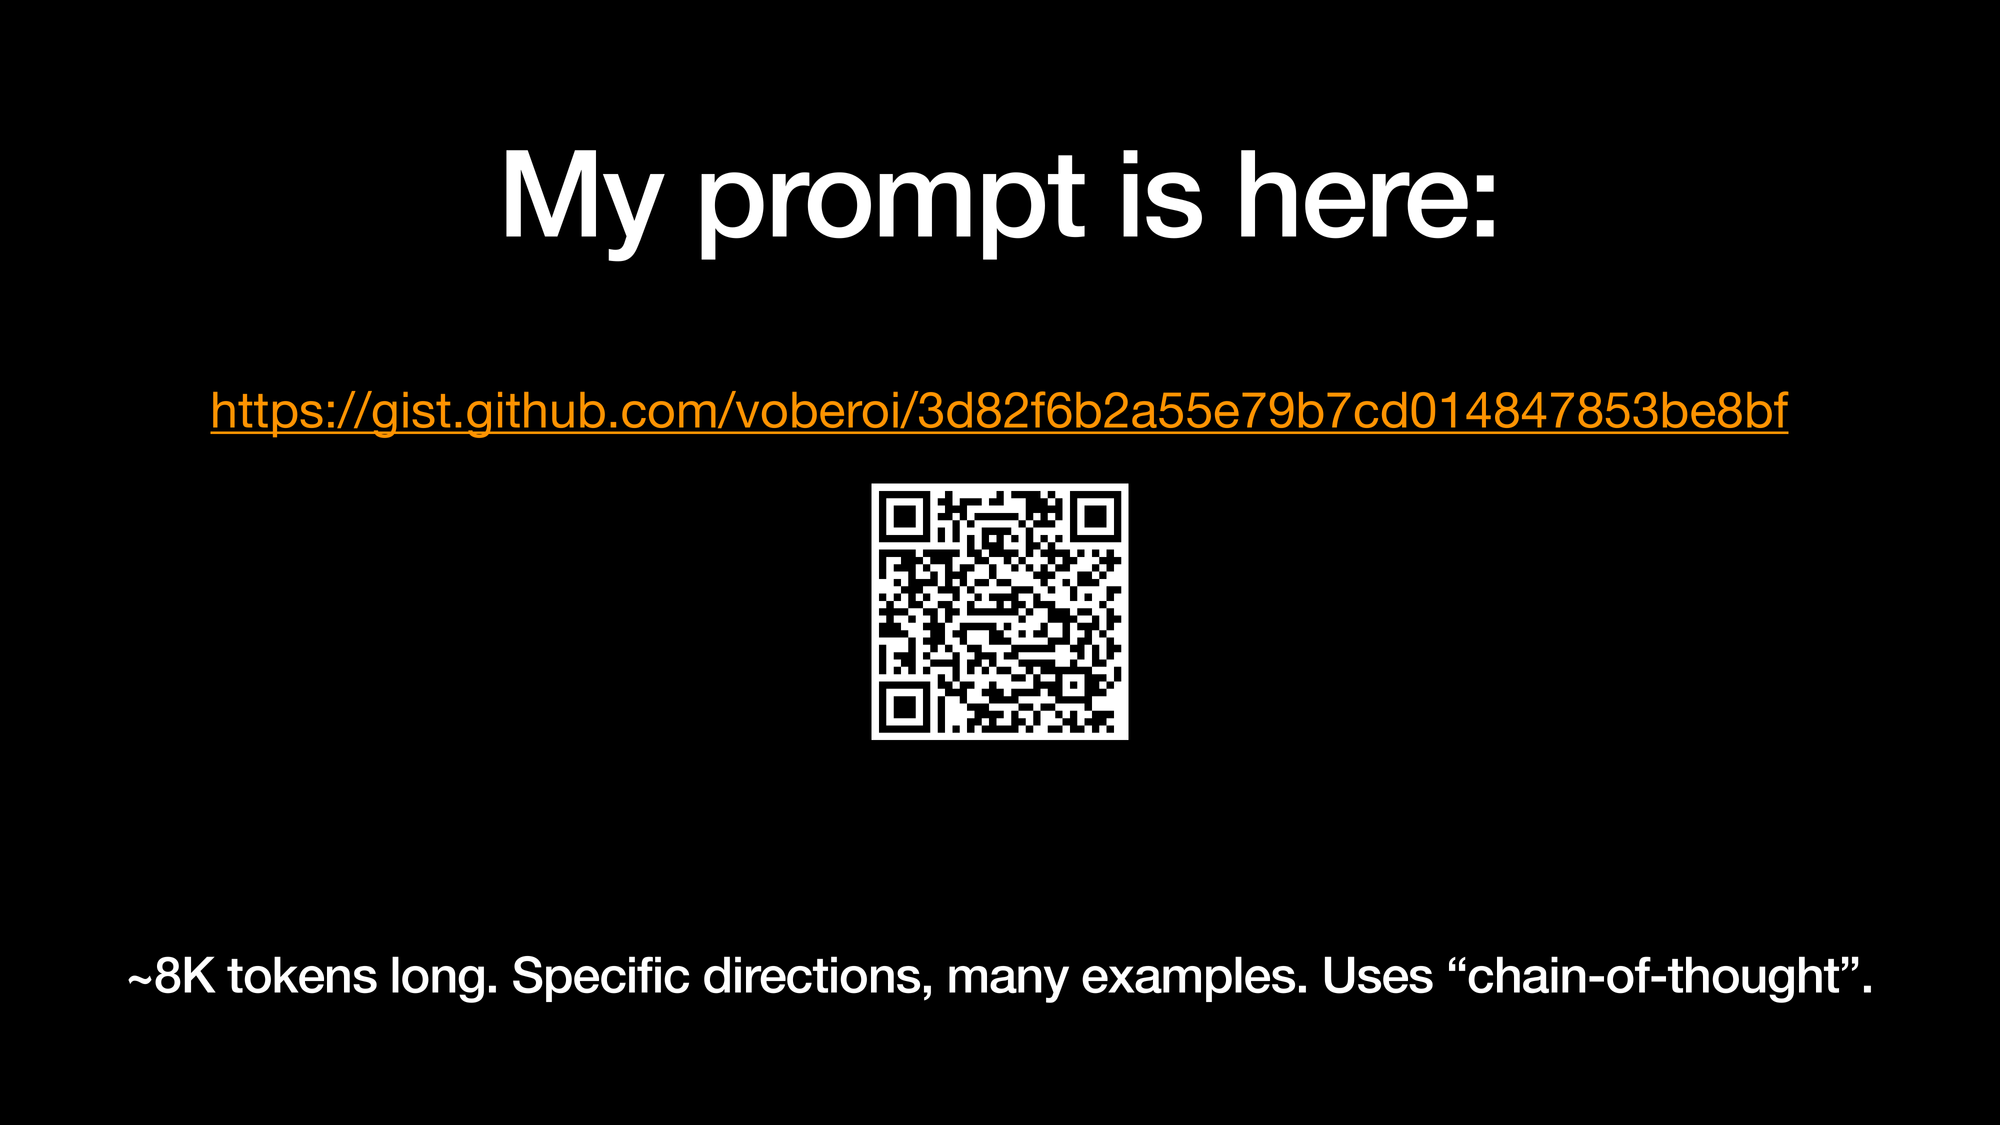 My prompt is here: https://gist.github.com/voberoi/3d82f6b2a55e79b7cd014847853be8bf. ~8K tokens long. Specific directions, many examples. Uses “chain-of-thought”.